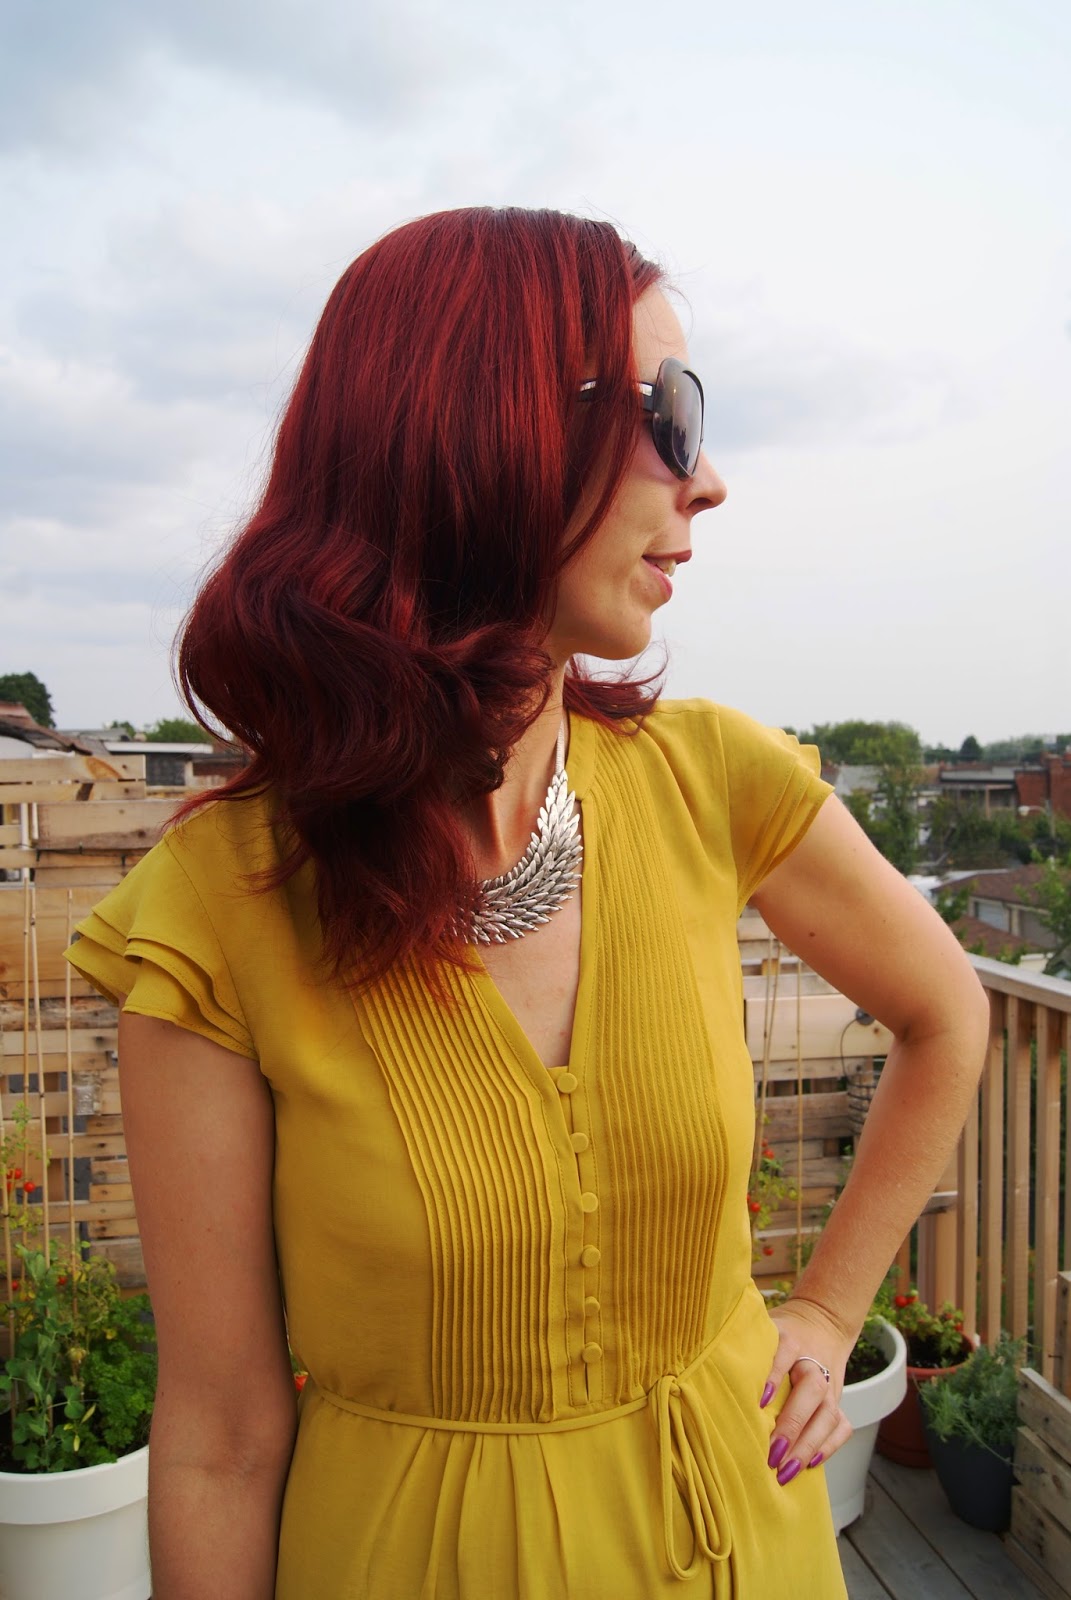 Mustard Yellow Warmth!: H&M Dress, Mary Frances Purse, Jessica Shoes from Sears, Shop For Jayu Necklace, Fall, Summer, Trend, OOTD, Outfit, fashion, style, styletips, thepurplescarf, melanie.ps, toronto,ontario, canada